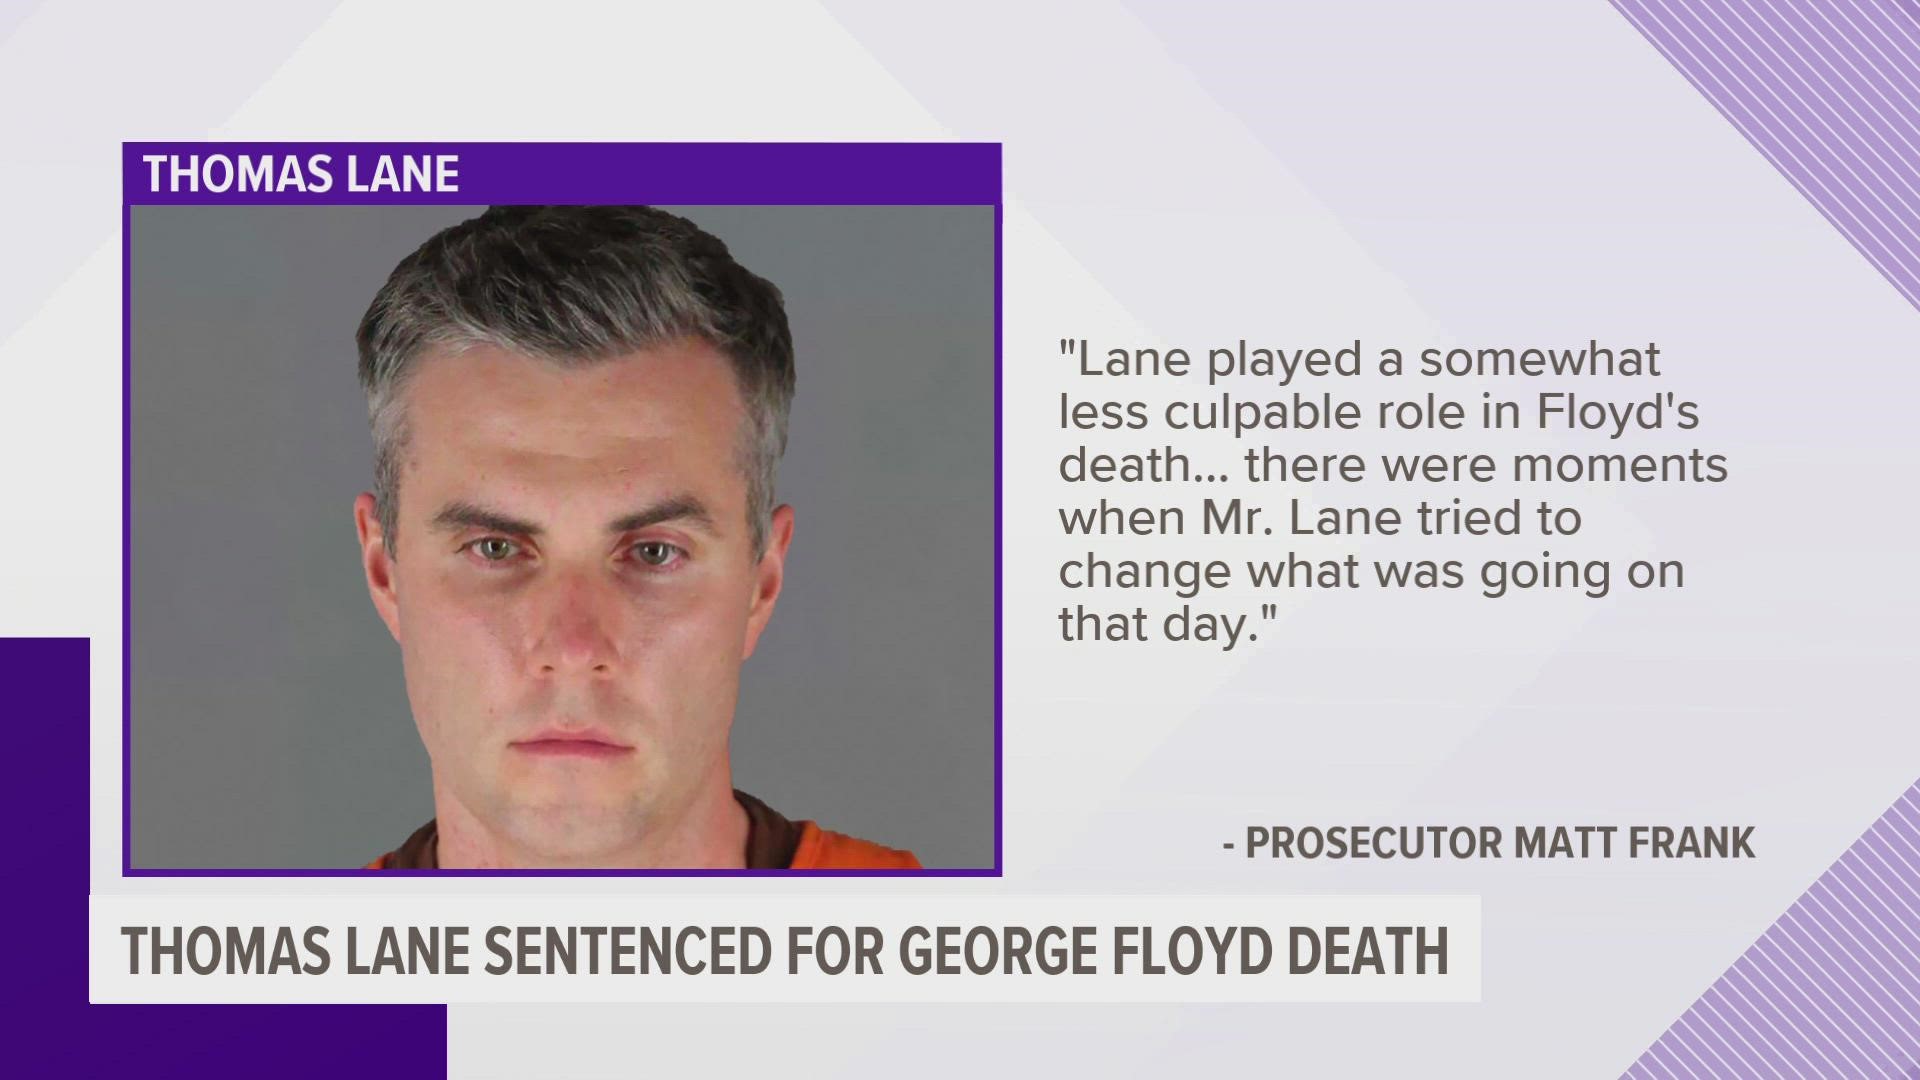 Thomas Lane is already serving a 2 1/2-year federal sentence for violating Floyd’s civil rights.